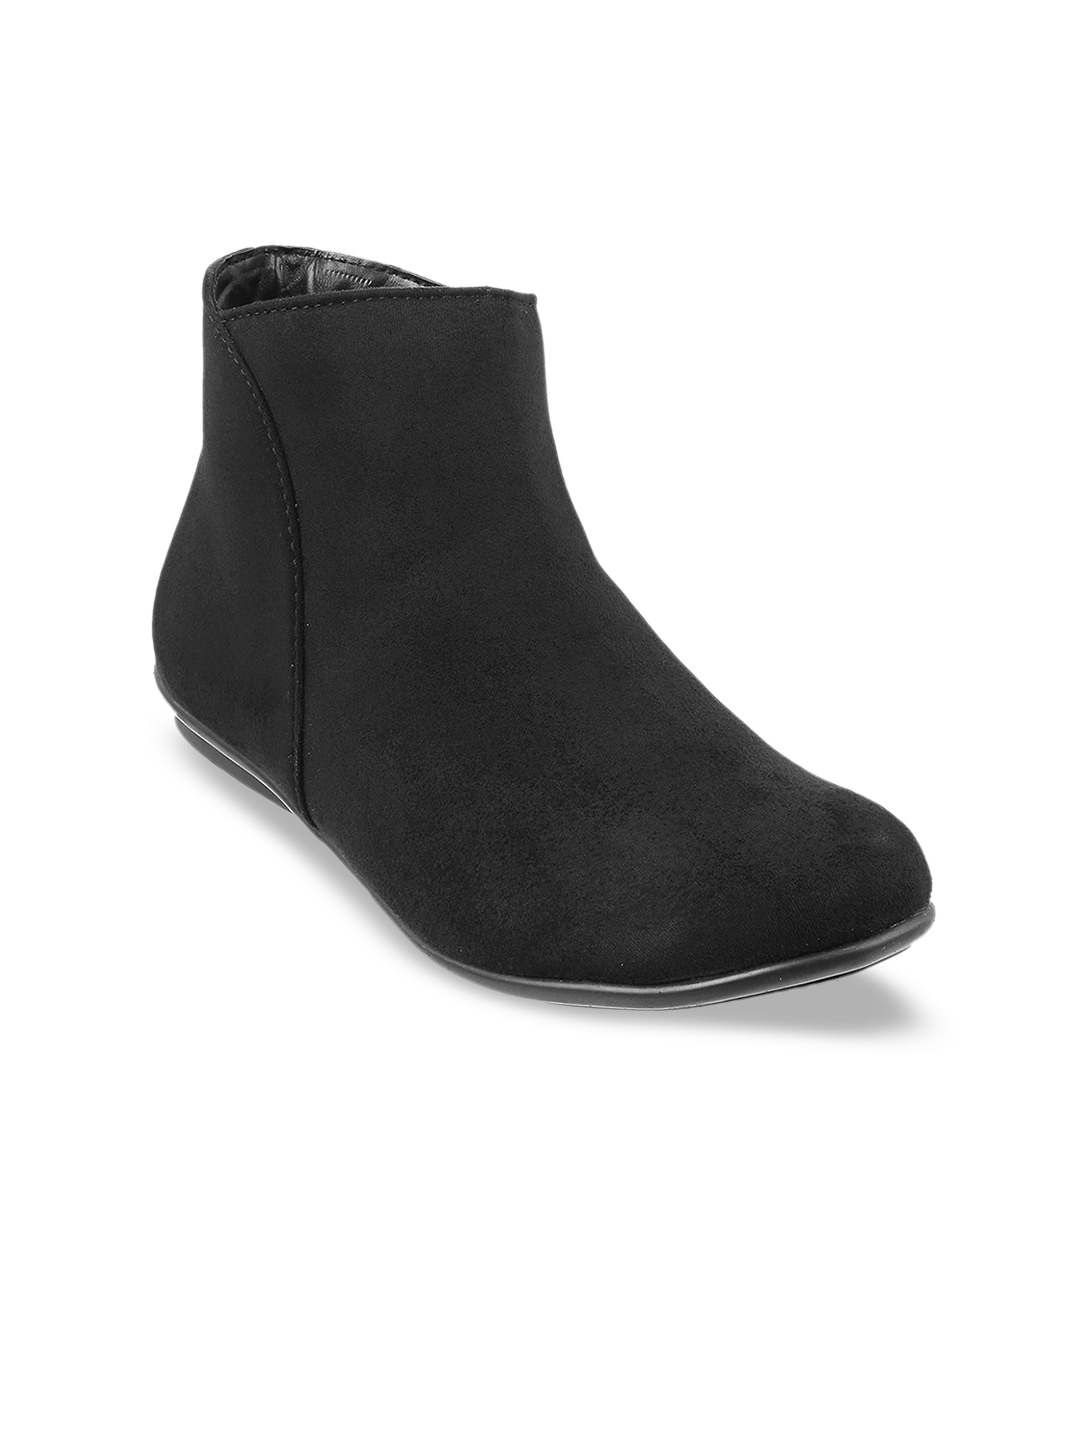 Mochi Women Black Solid Boots Price in India